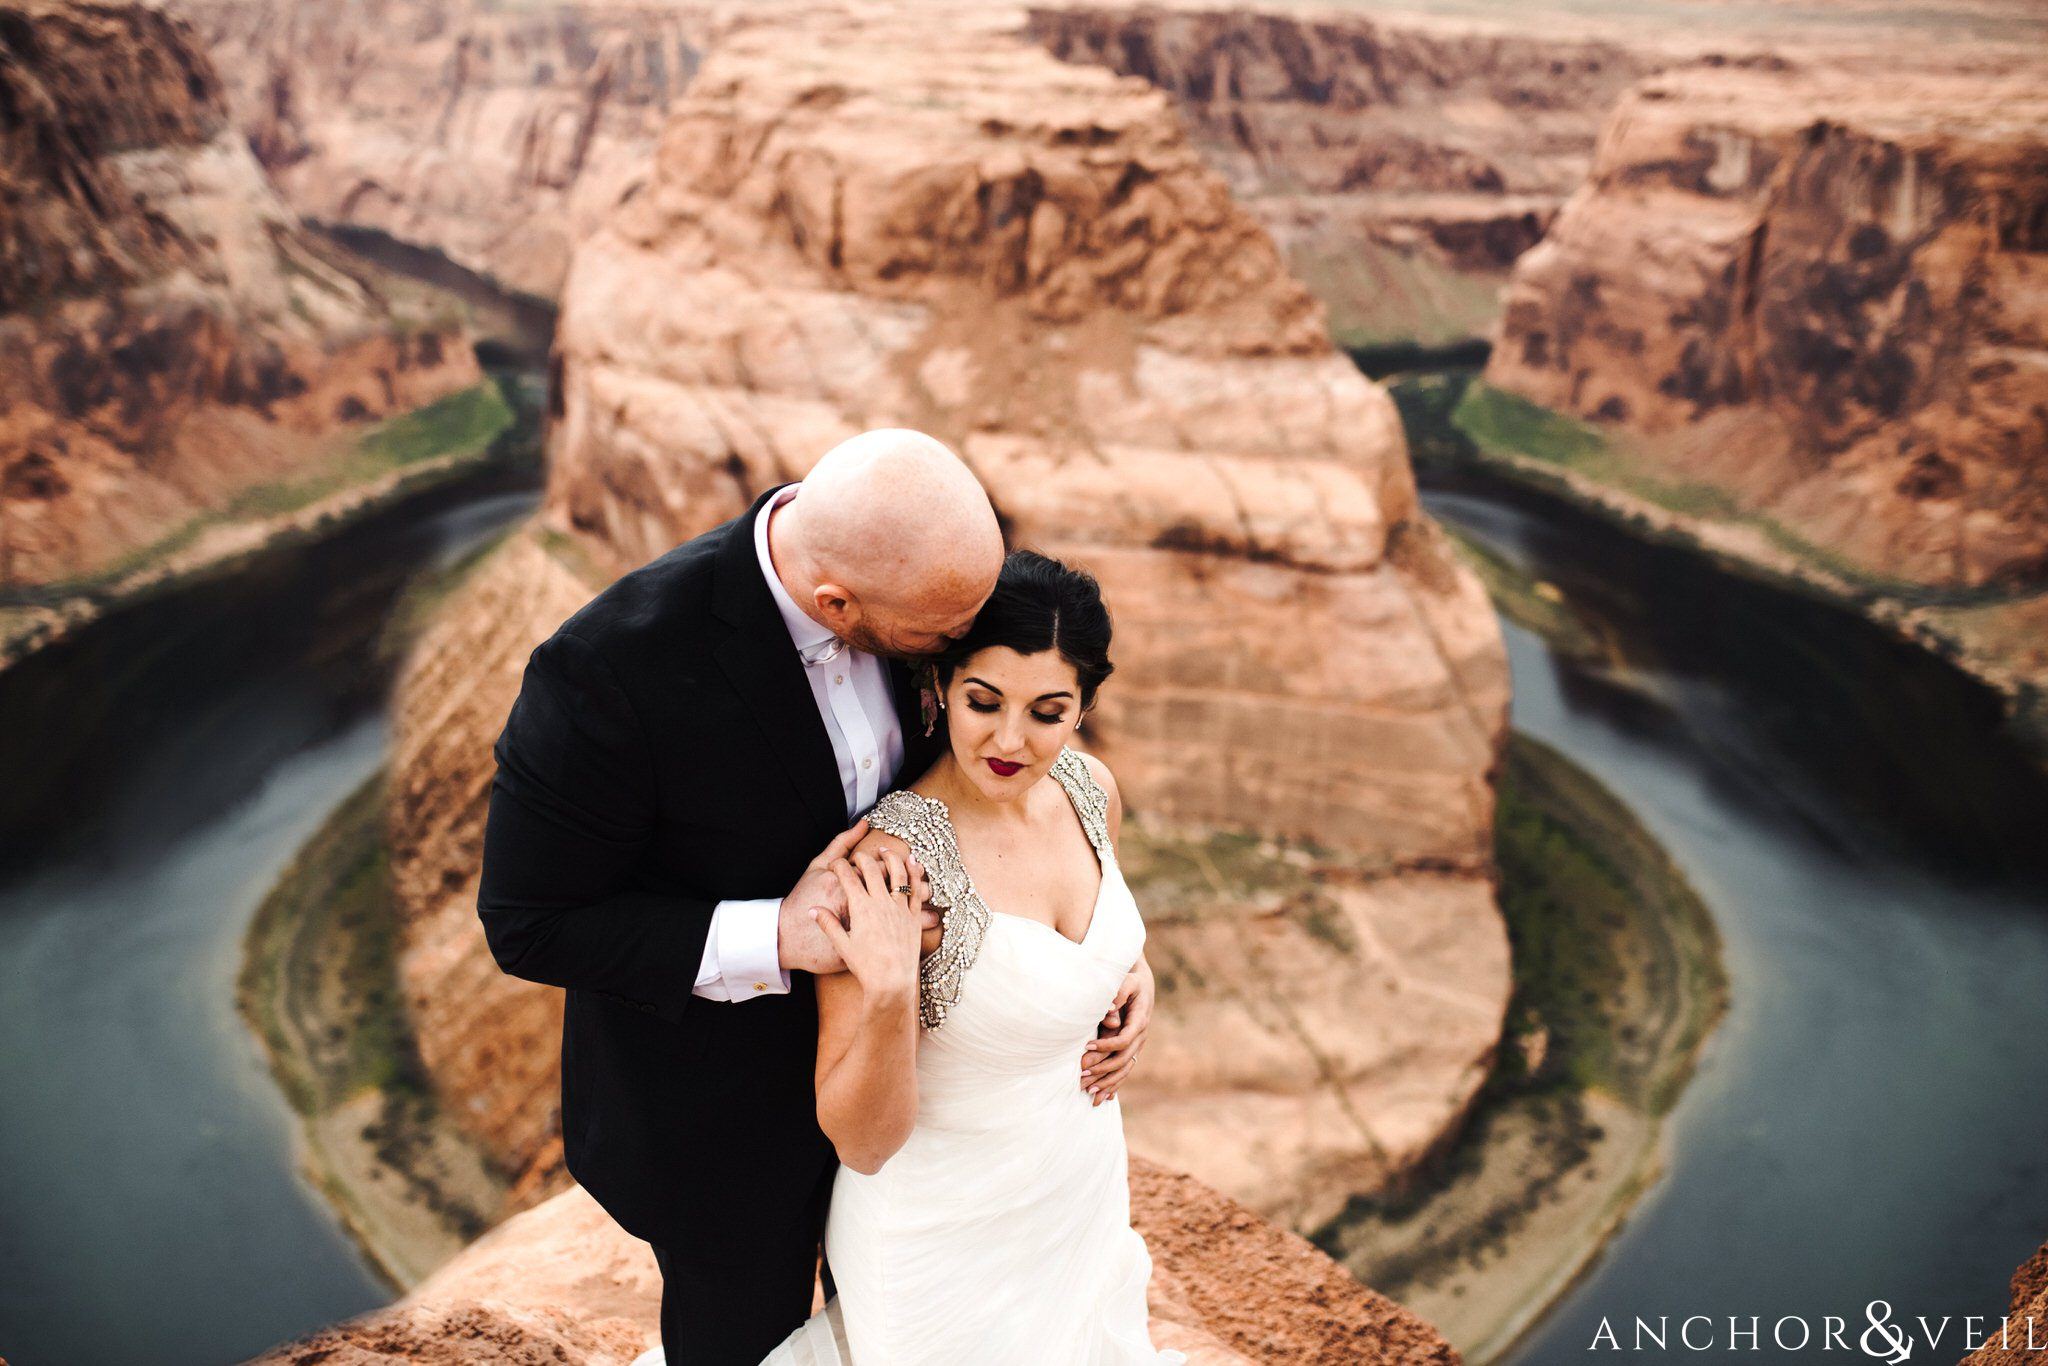 holding her close during their Horseshoe Bend Elopement Wedding